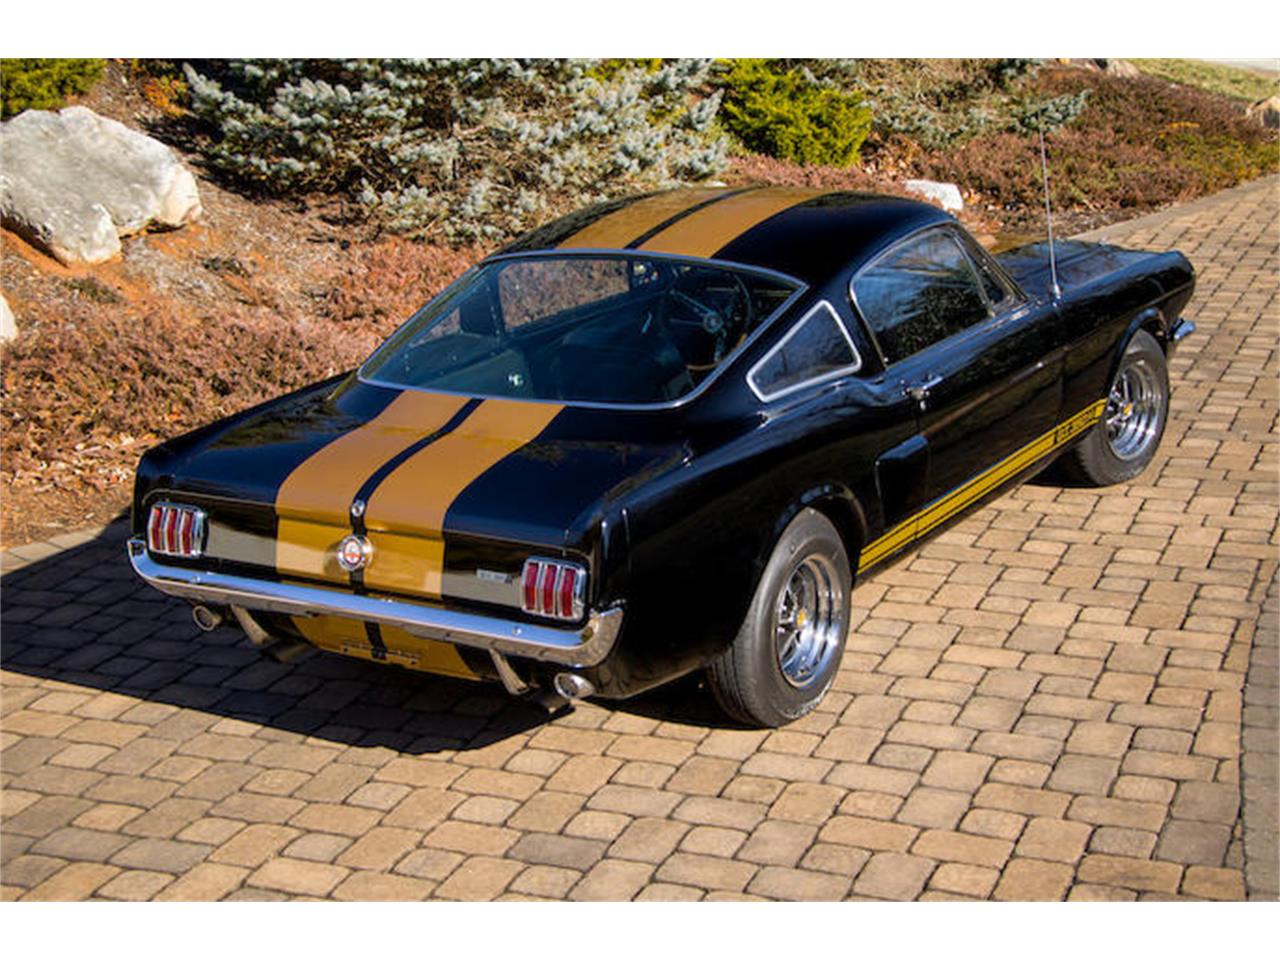 1966 Ford Mustang Shelby Gt350 Hertz For Sale Cc